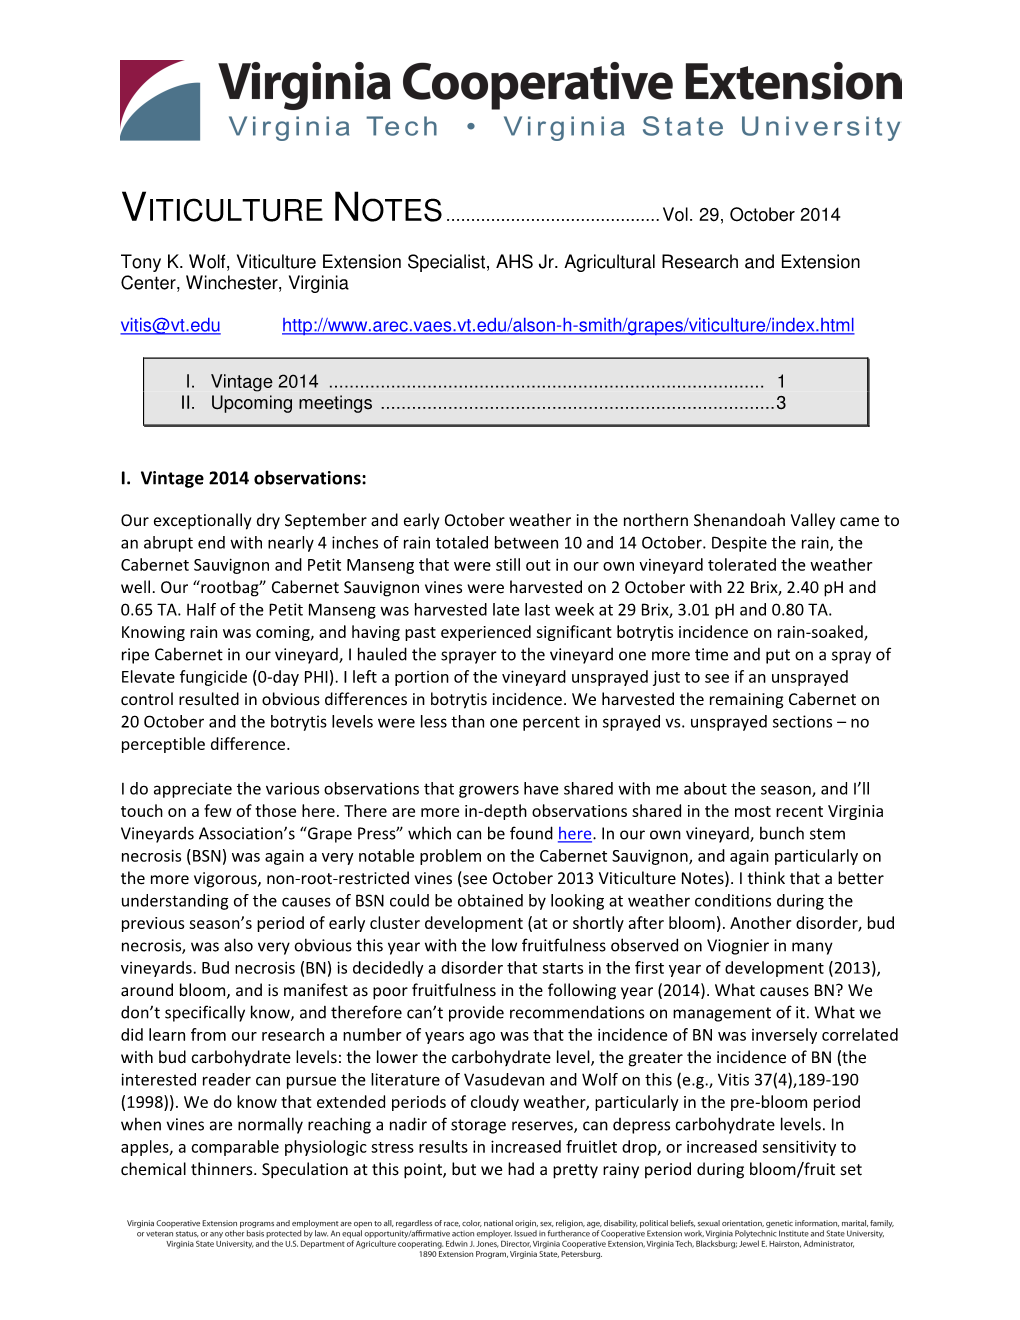 Viticulture Notes October 2014